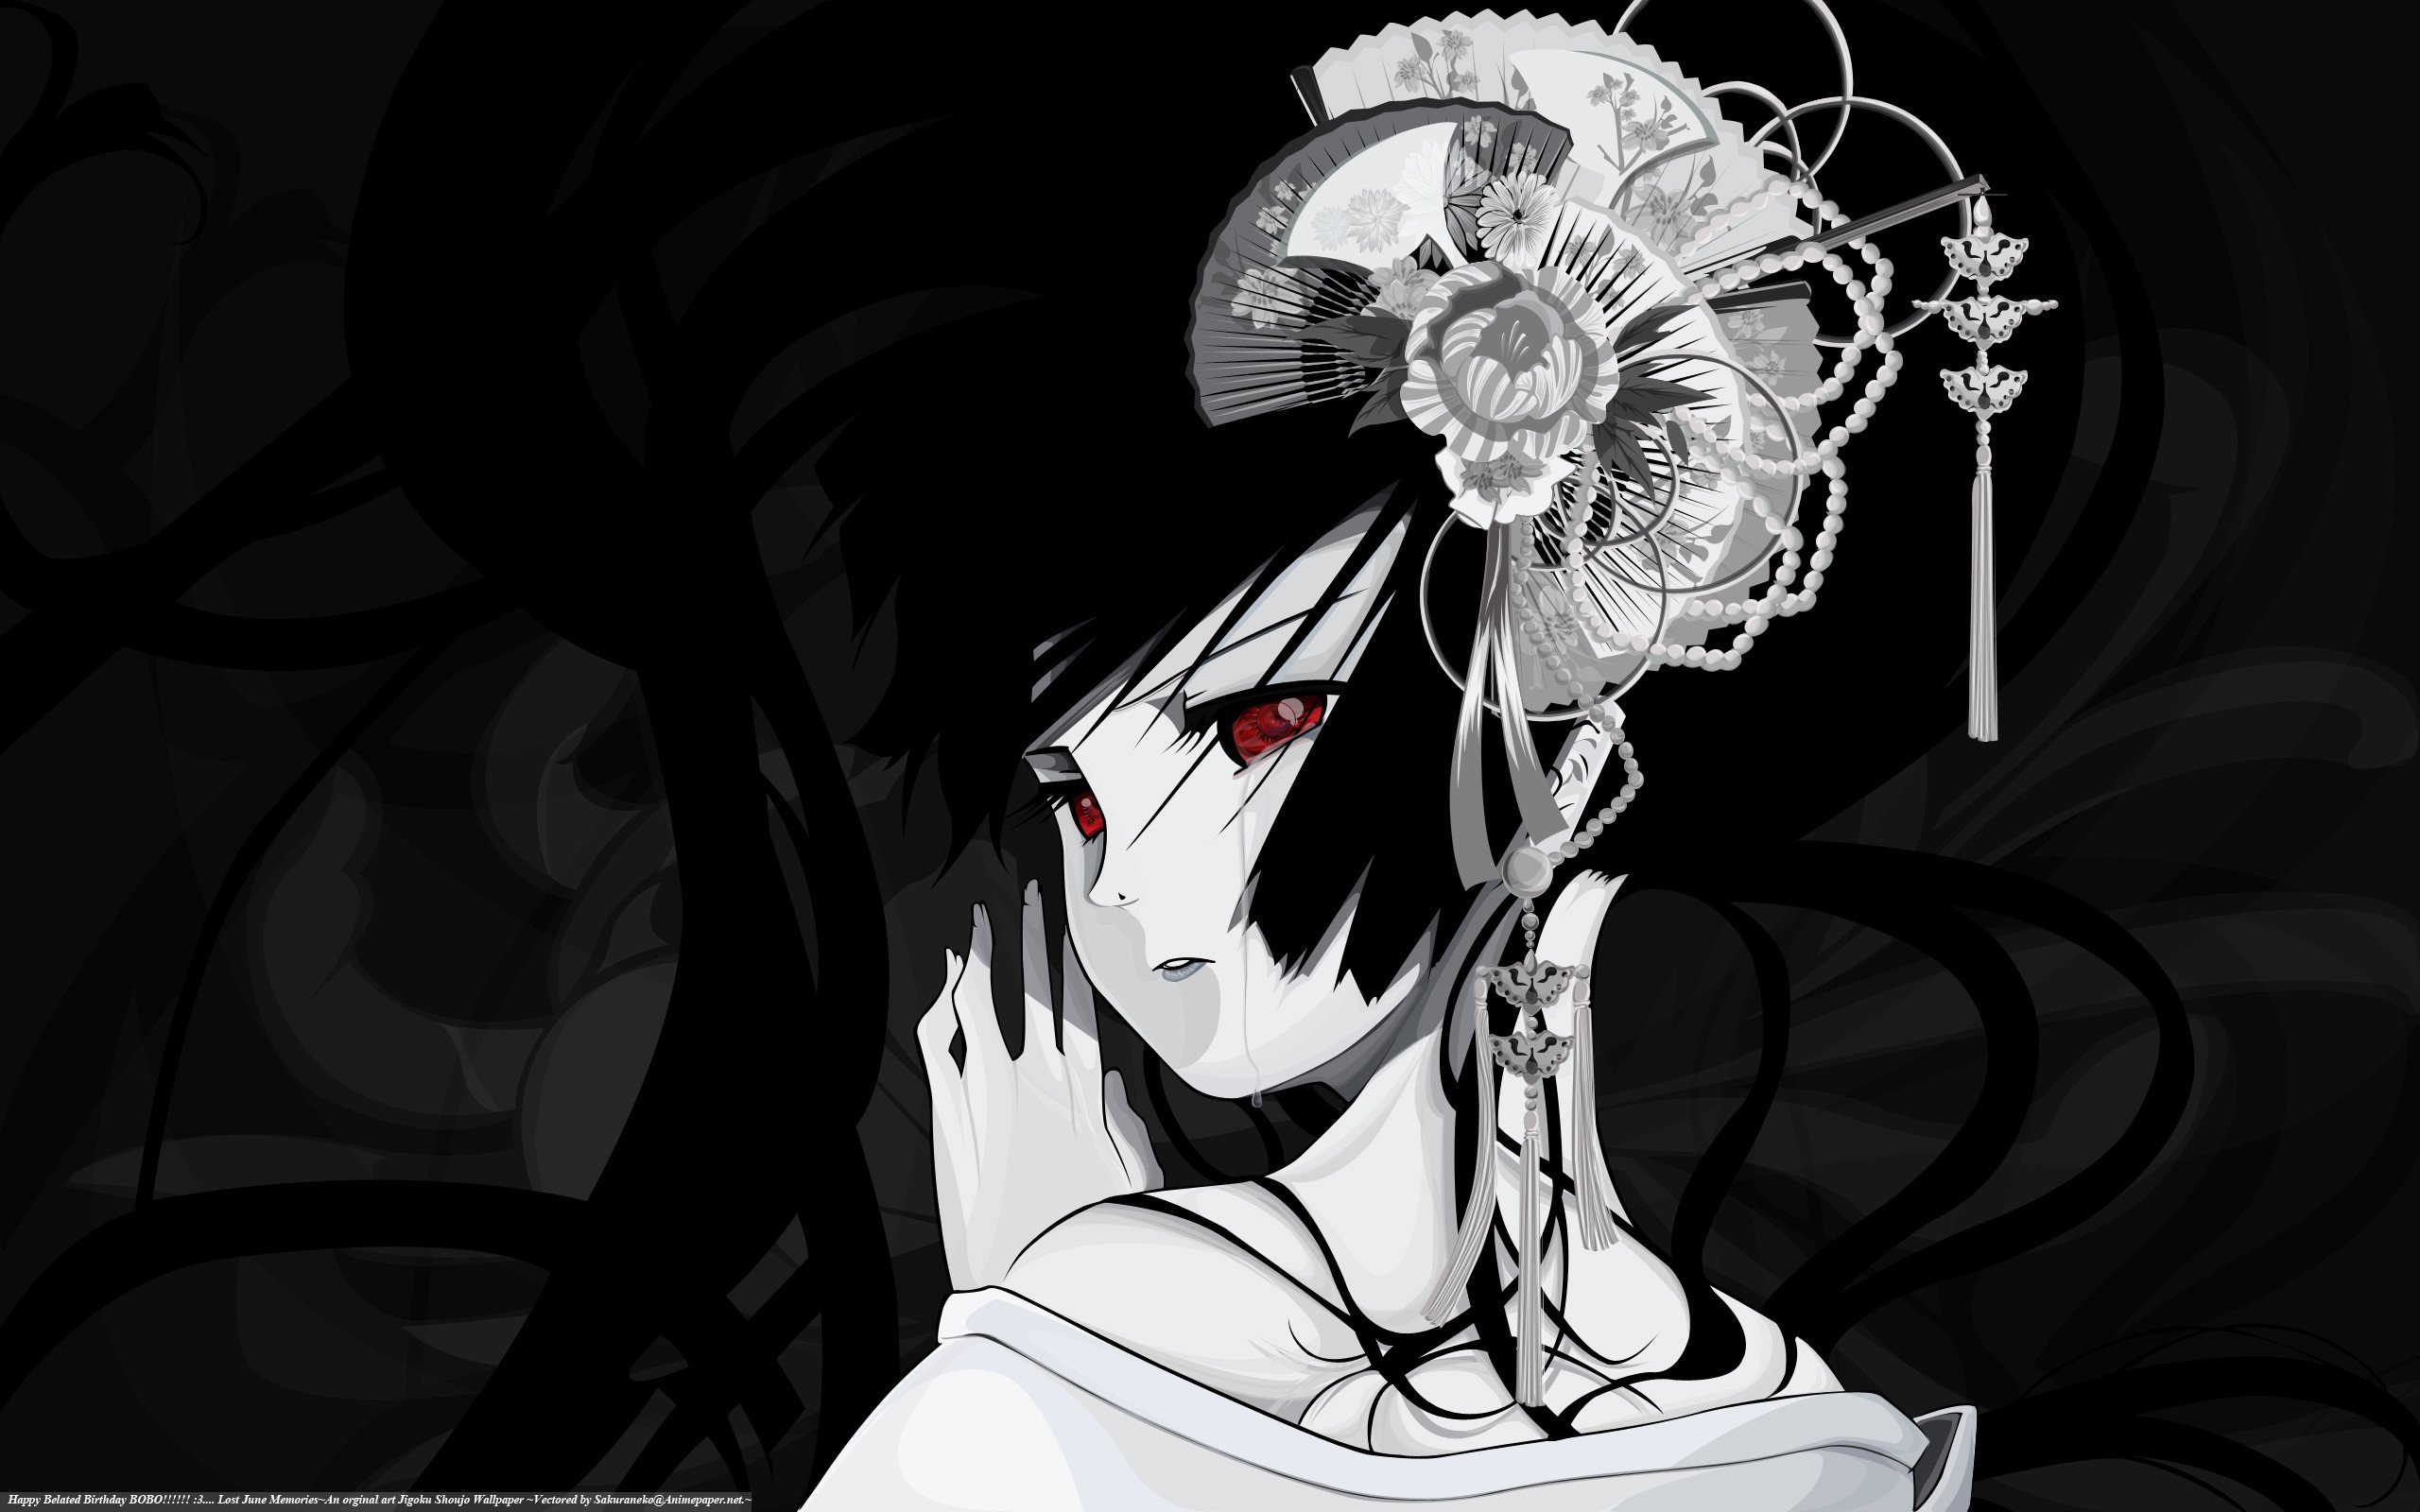 Black And White Anime Wallpaper 4k Pc Find Out 10+ Truths Of Anime
Black And White Wallpaper They Did Not